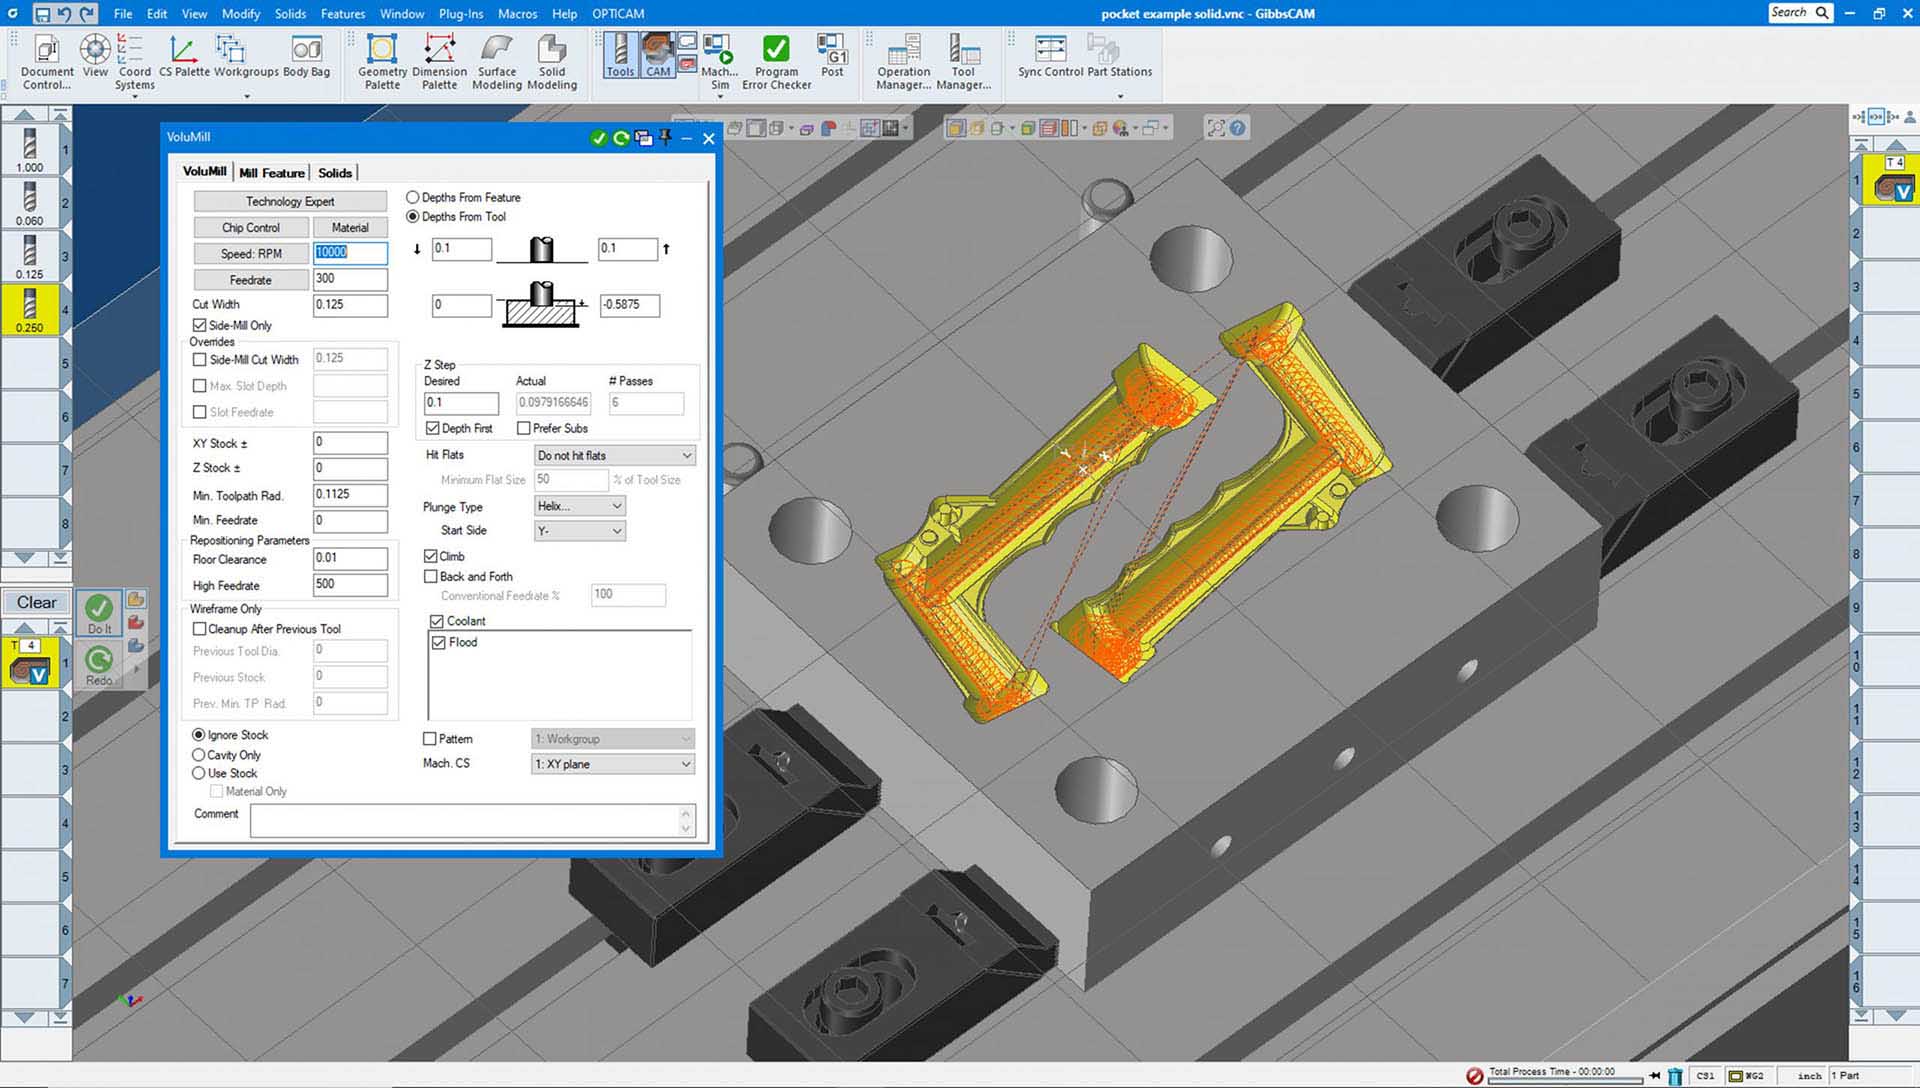 Toolpath starting zone control for symmetrical cuts to aid chip evacuation and reduce rapid movements